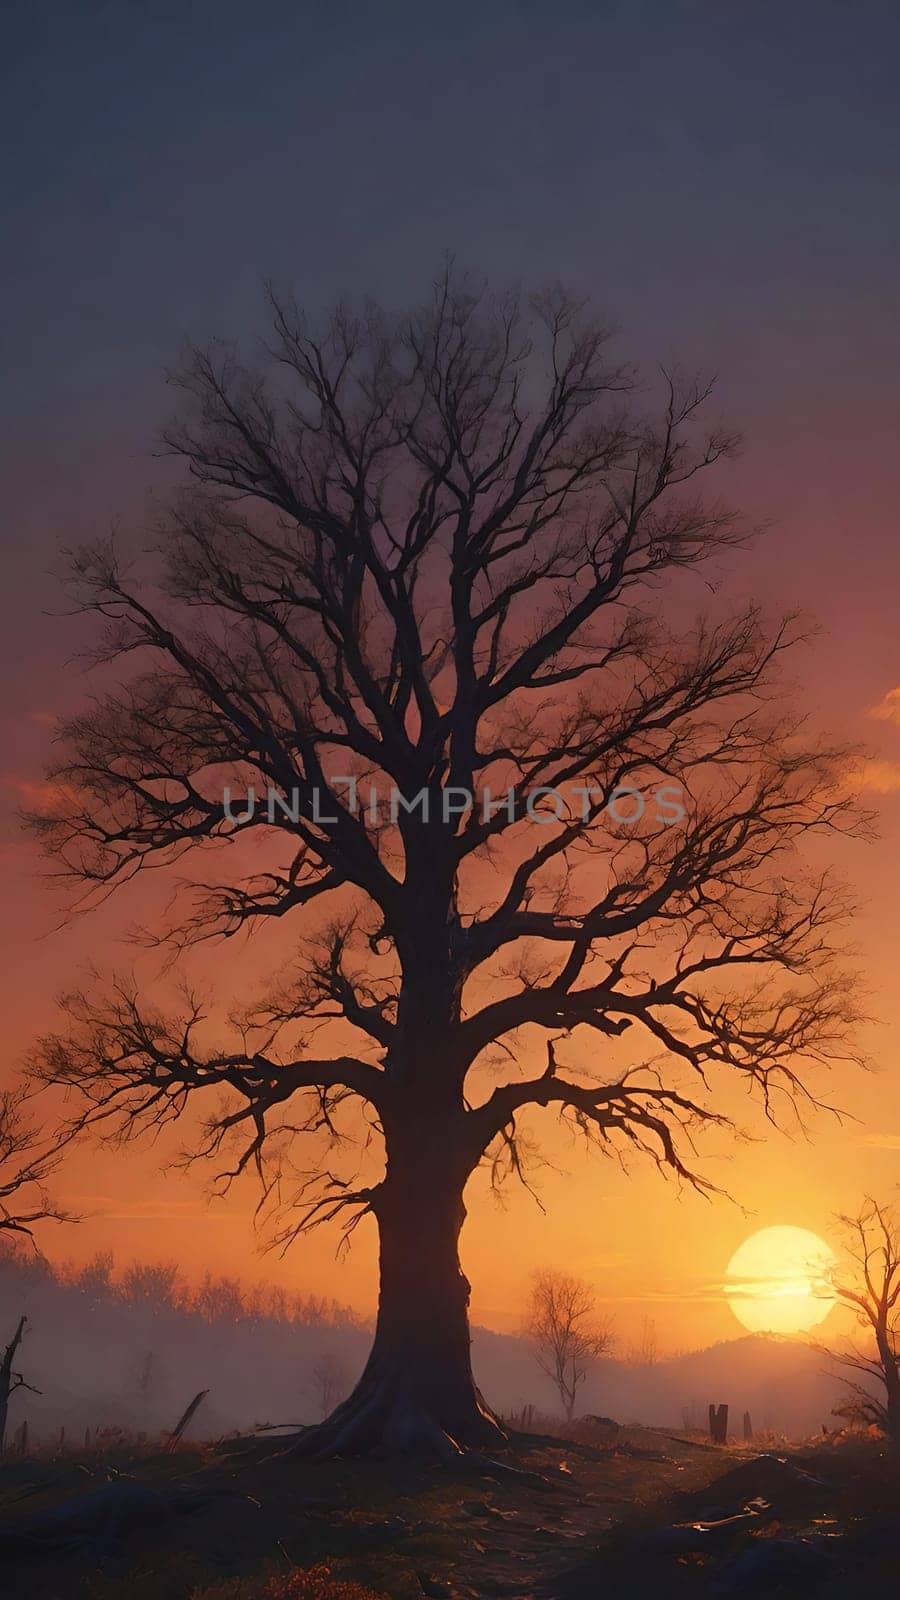 Beautiful tree in the forest at sunset, 3d rendering. Computer digital drawing.Foggy landscape with old oak tree at sunrise in the forest.Beautiful oak tree in the fog at sunset. Nature composition.